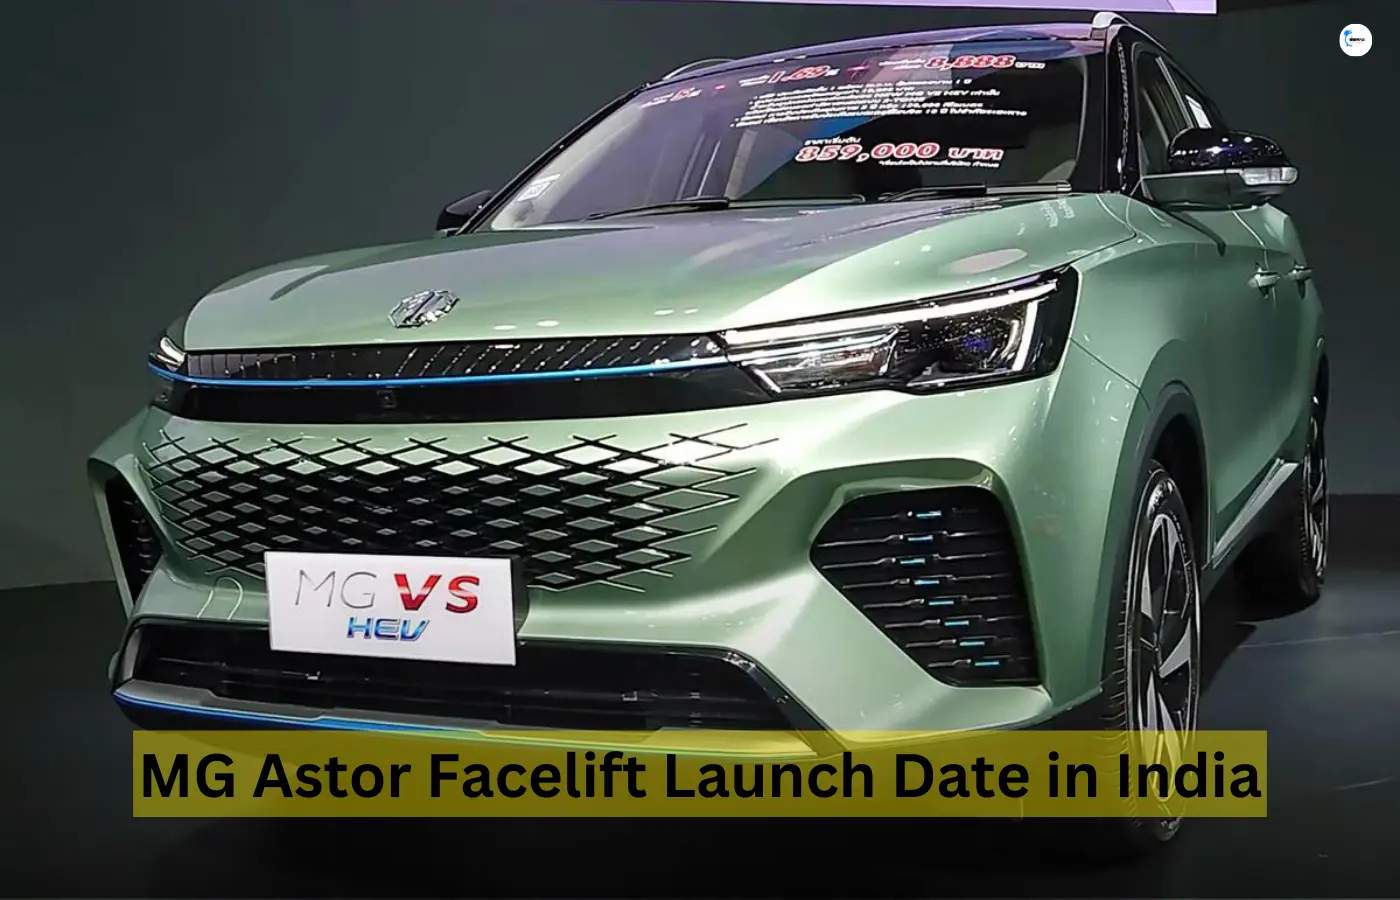 MG Astor Facelift Launch Date in India